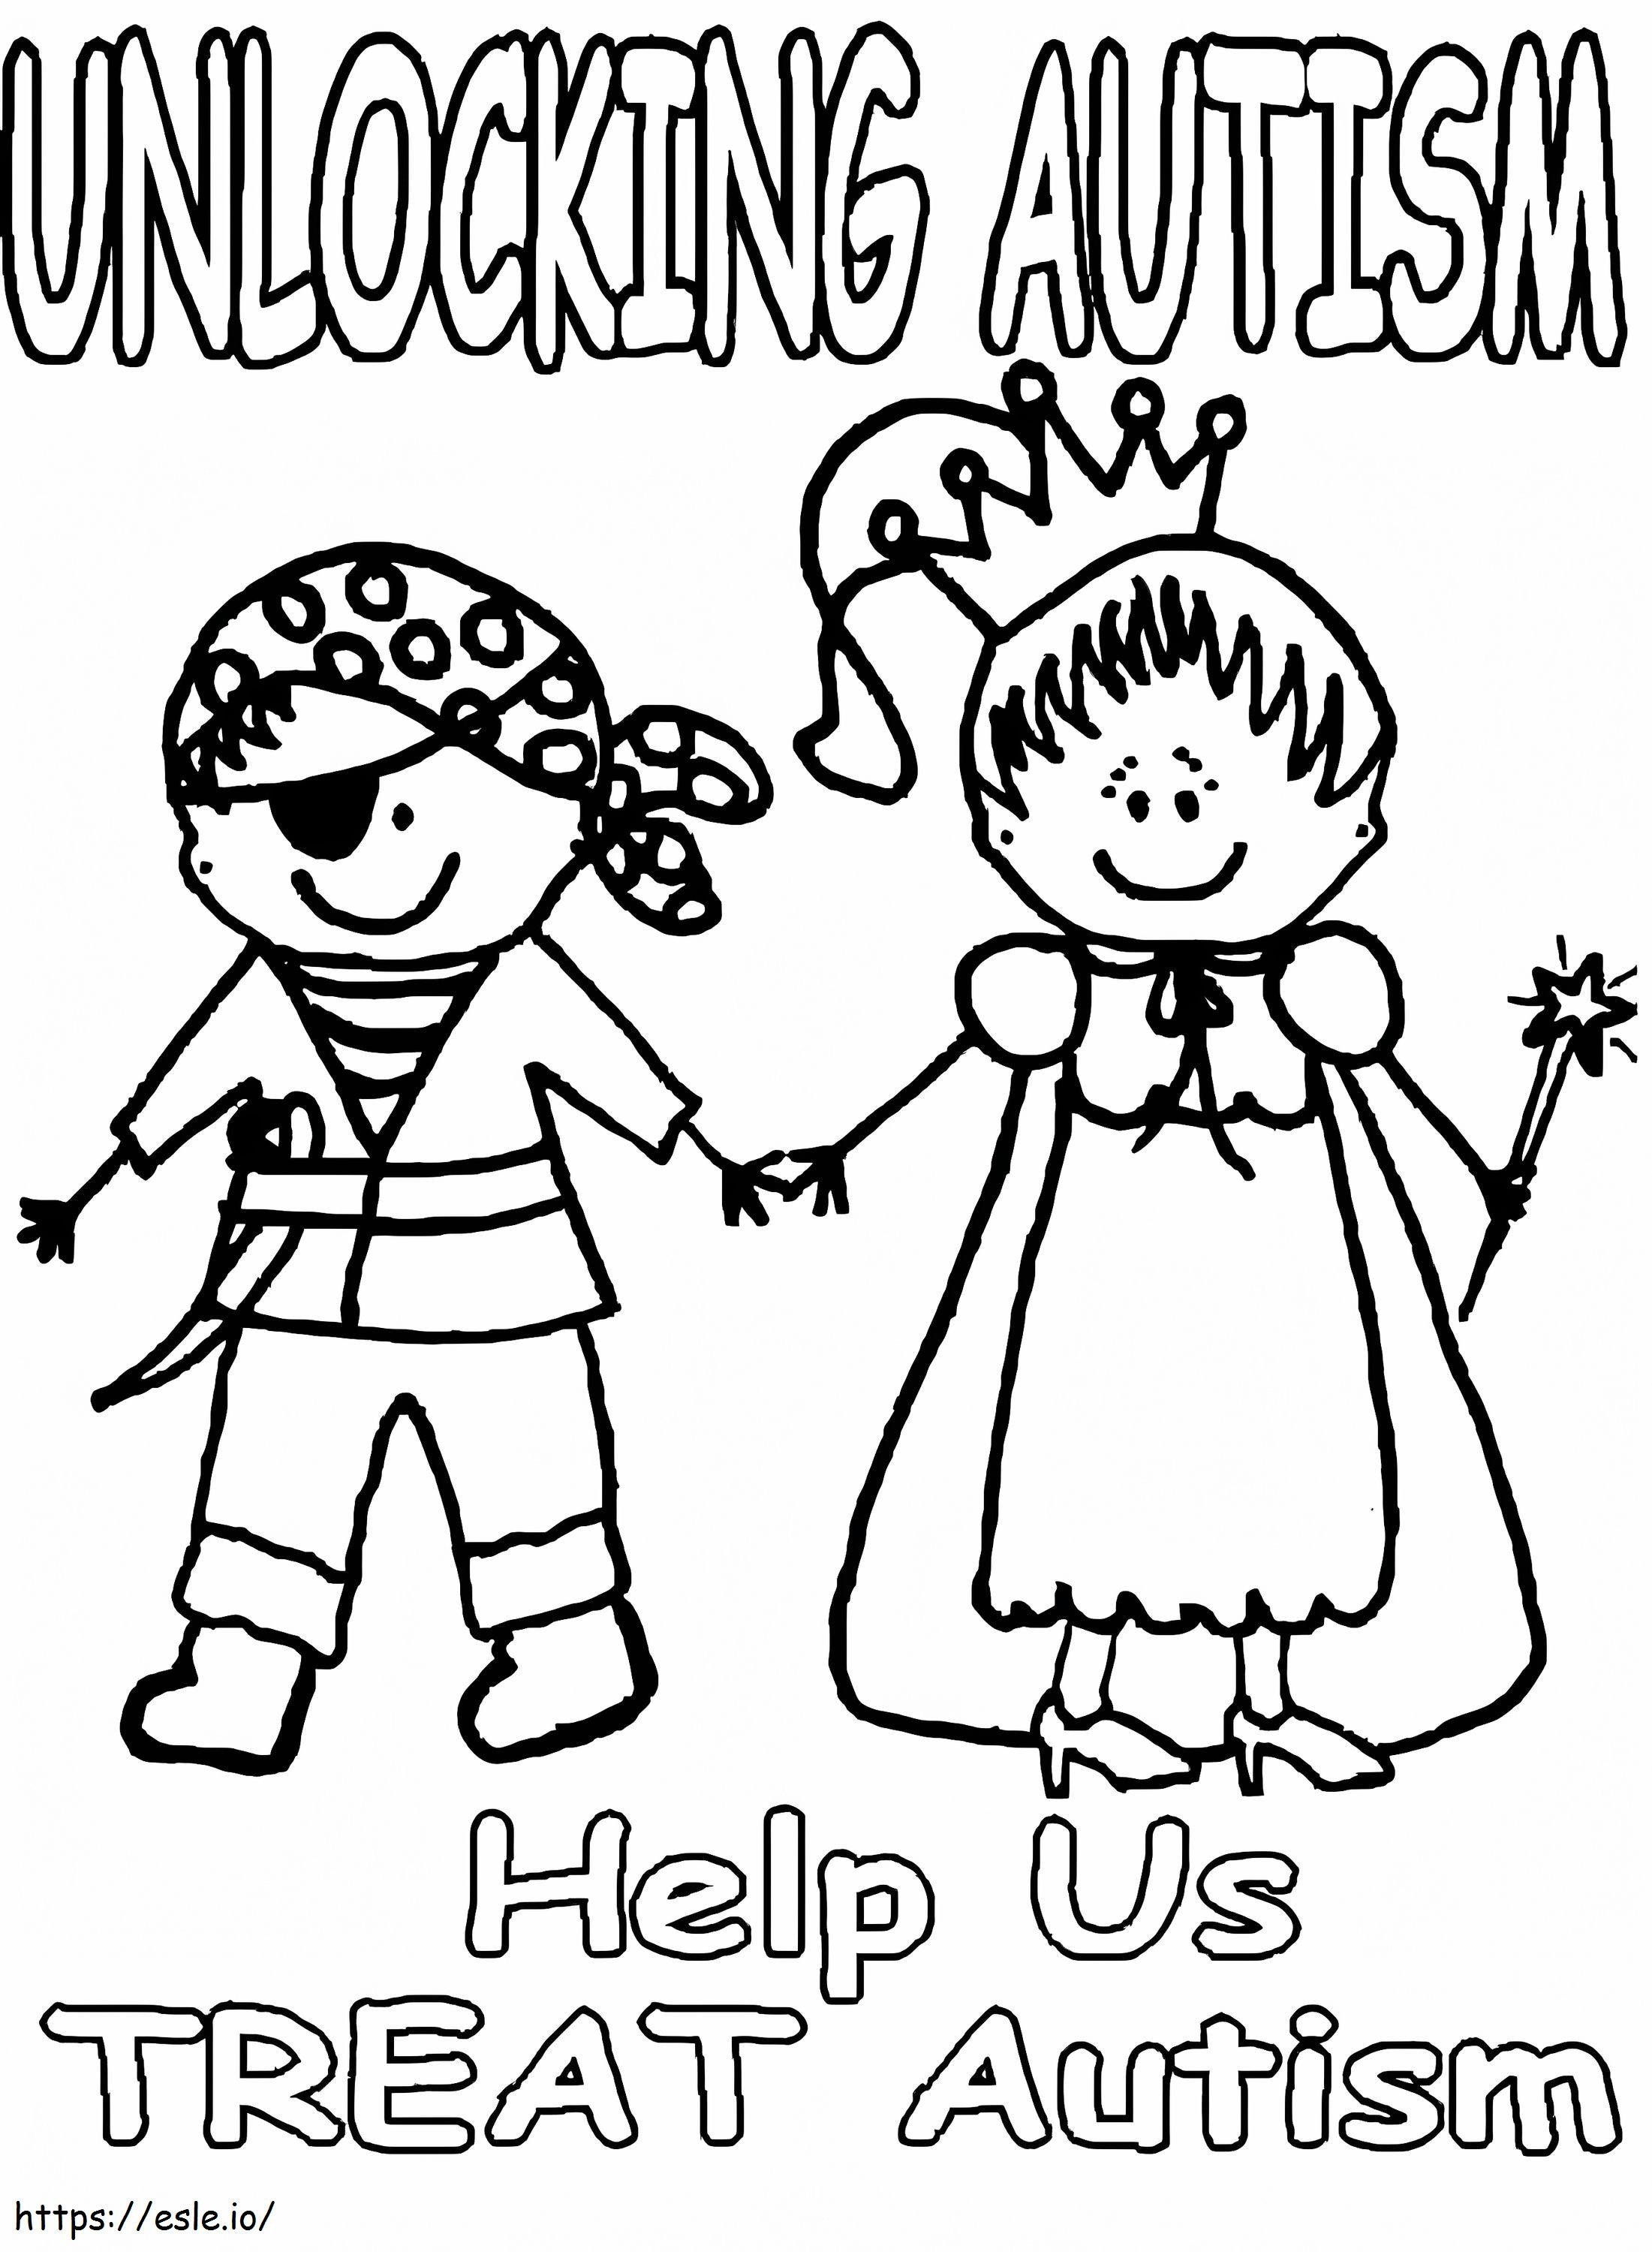 Unlocking Autism coloring page